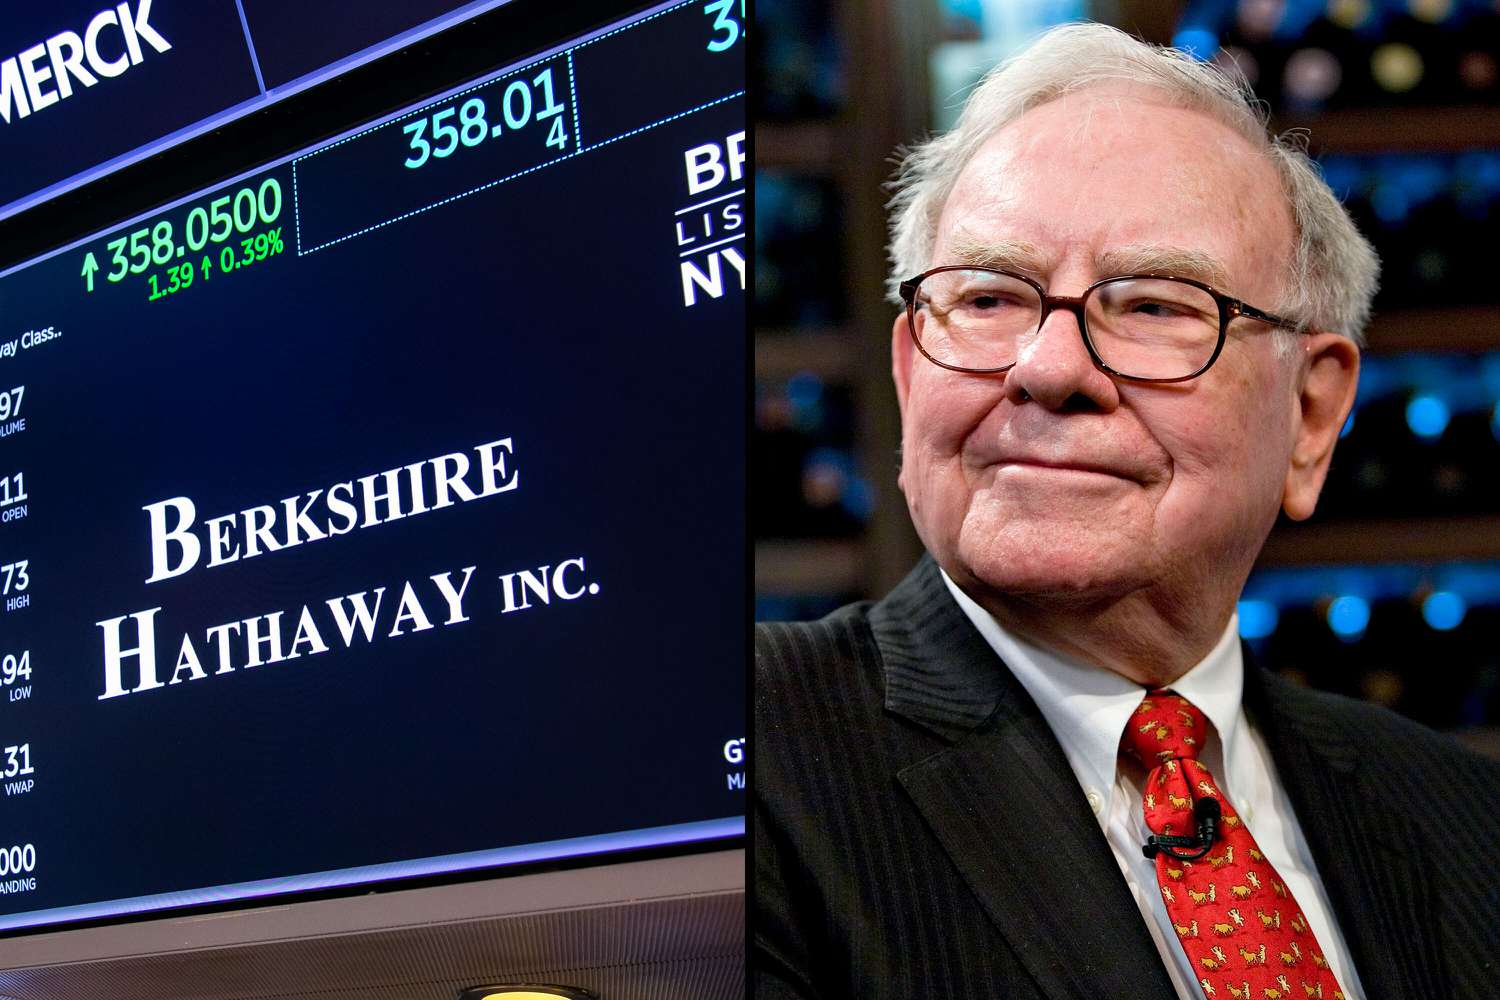 What You Need To Know Ahead of Warren Buffett’s Berkshire Hathaway Annual Meeting [Video]